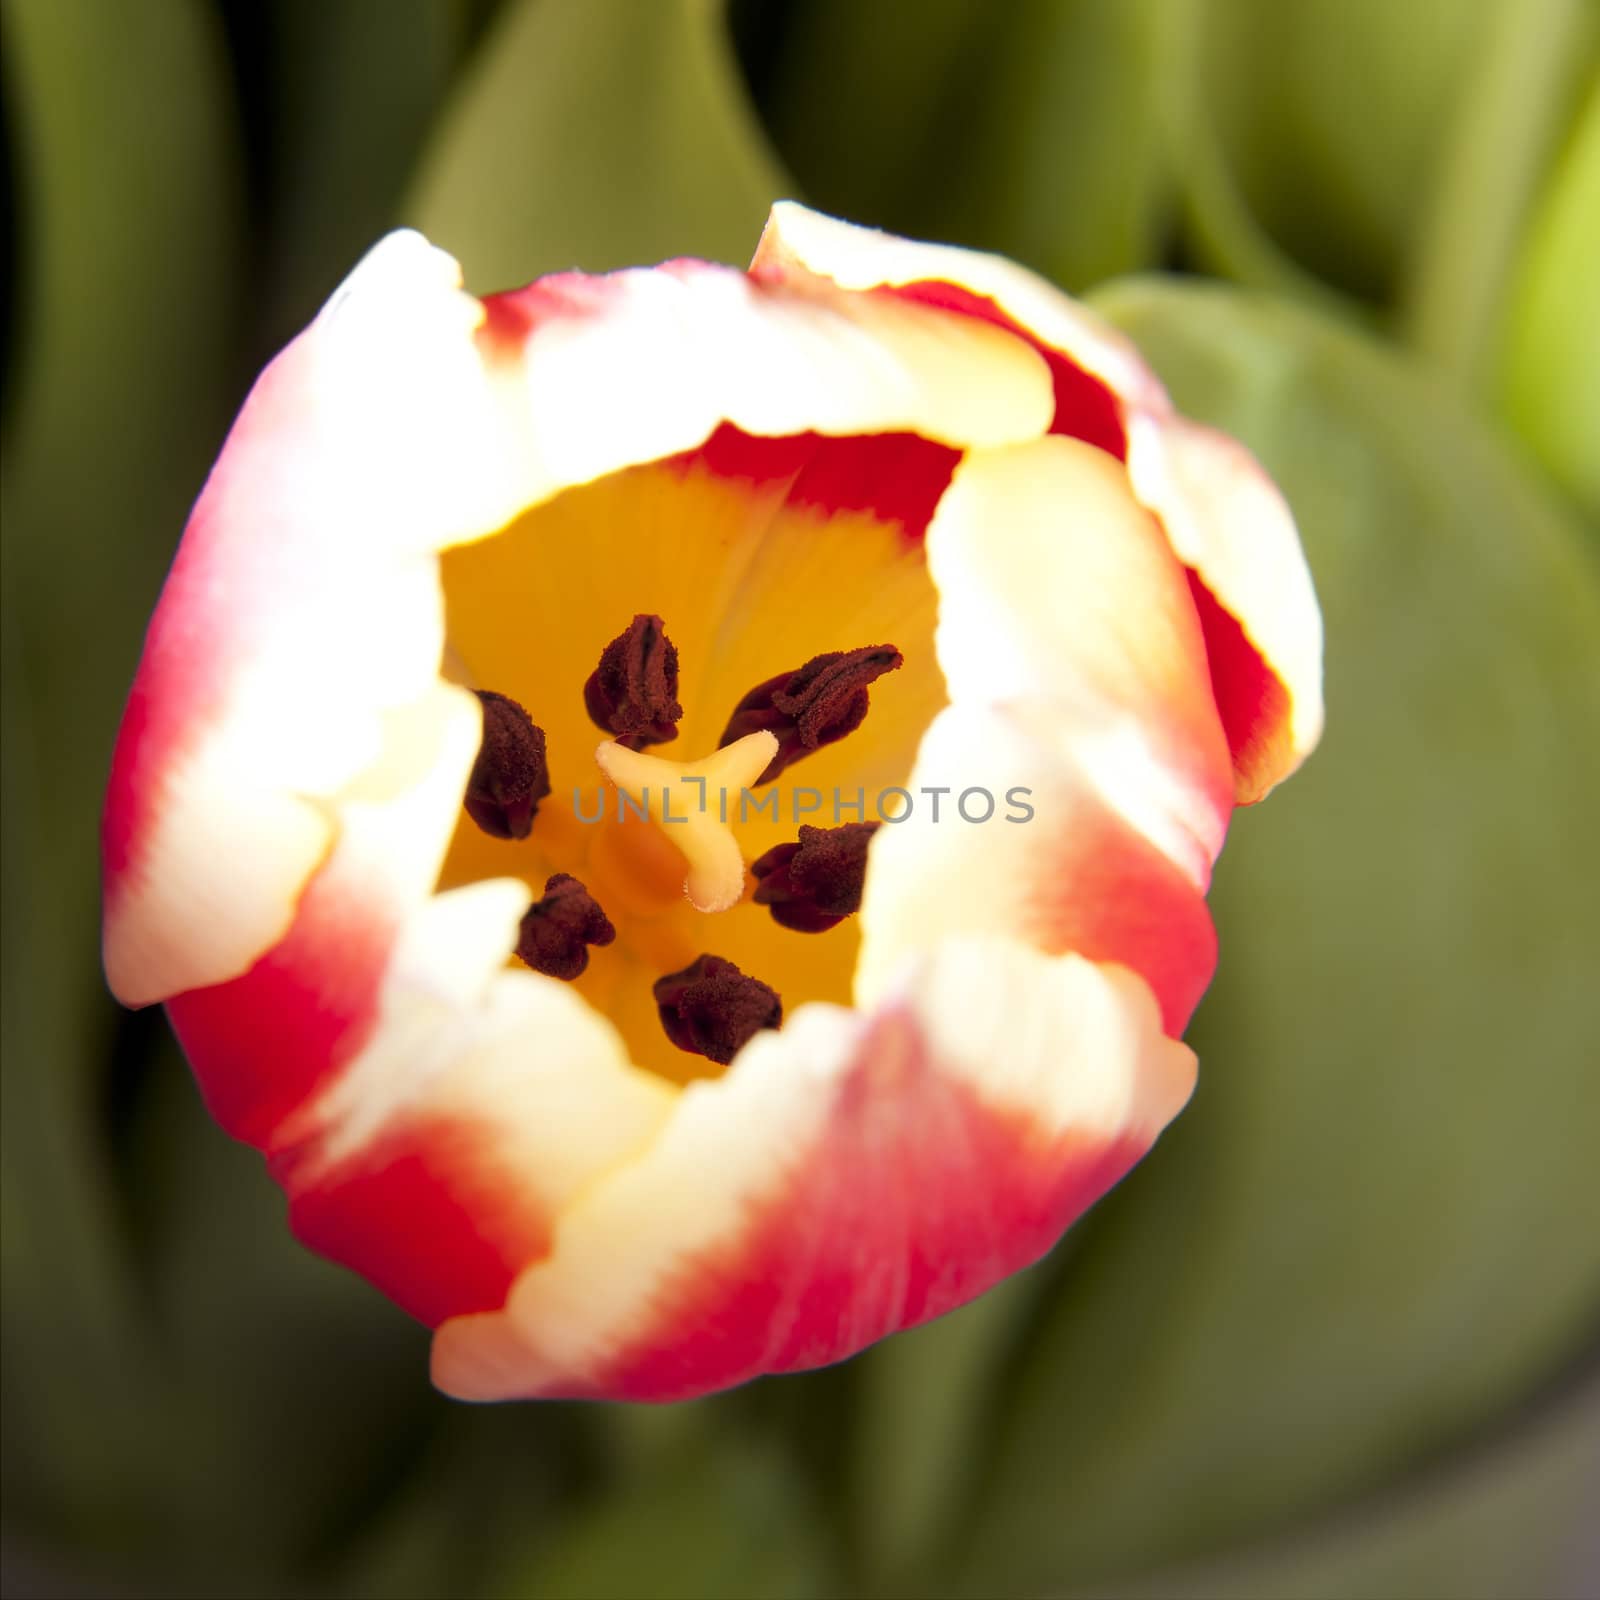 Red and yellow tulip just opening with focus on stamen and pistol inside the flower.